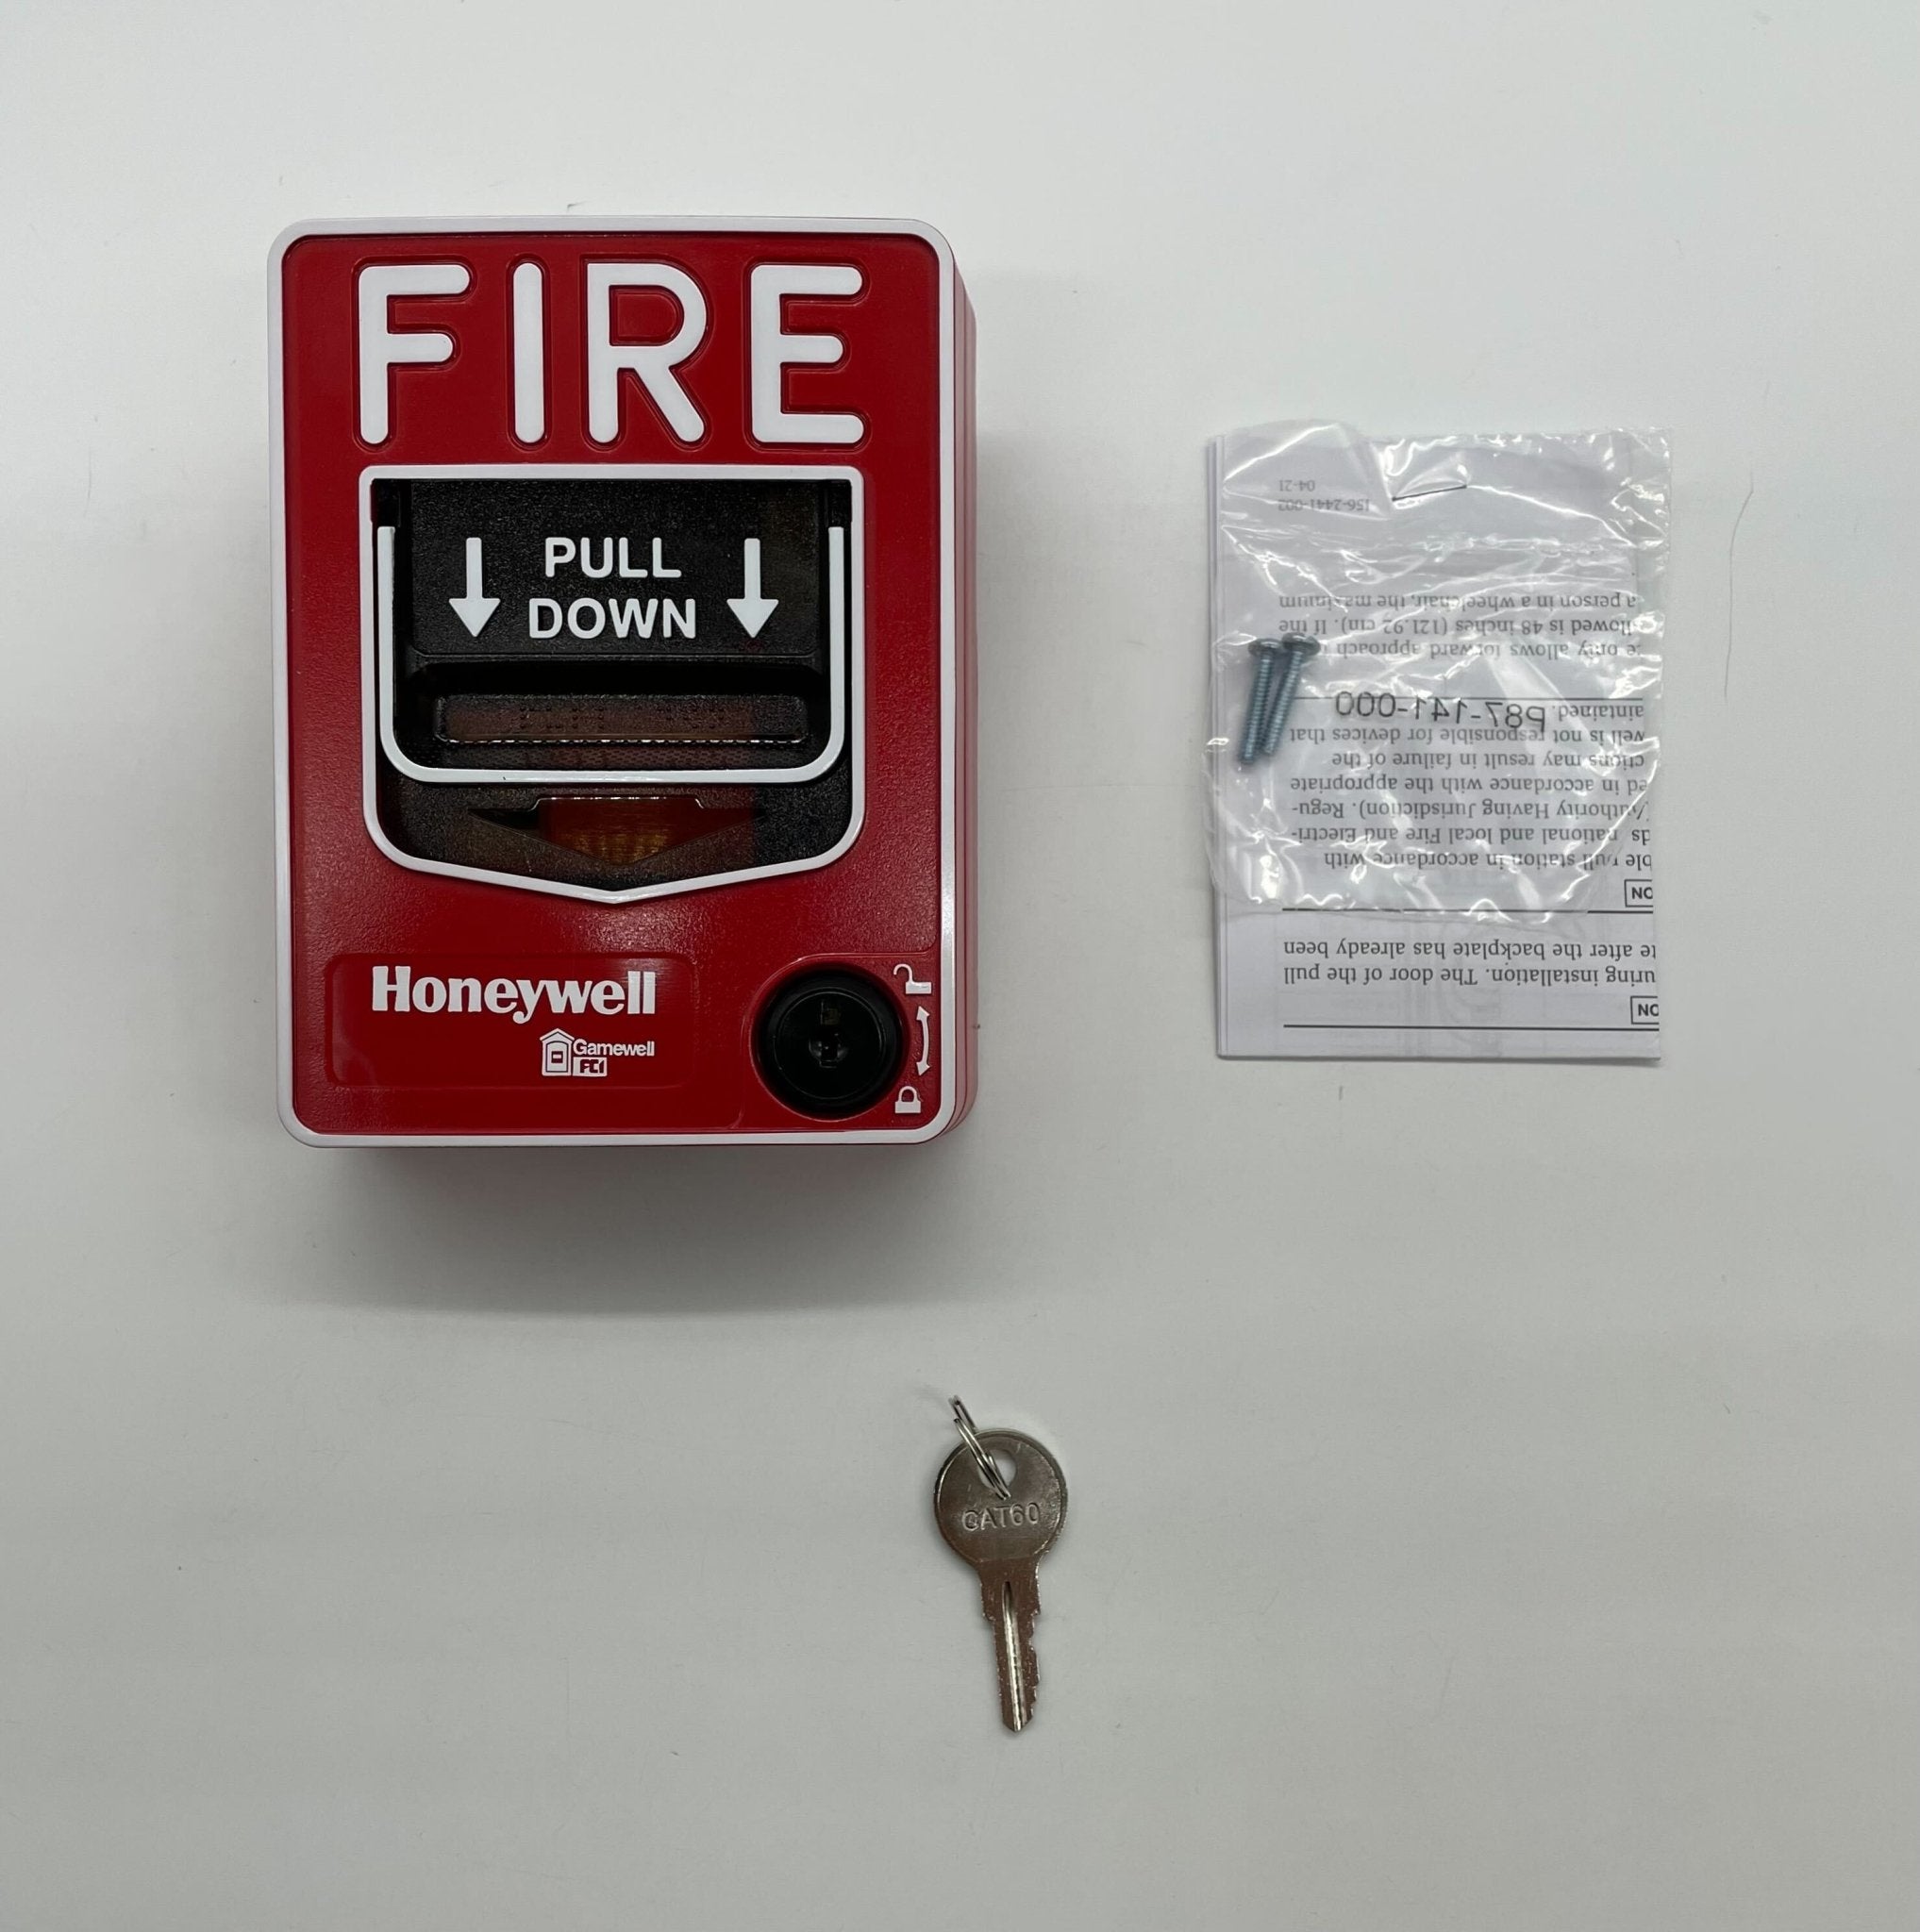 Gamewell-FCI MS95-SL - The Fire Alarm Supplier